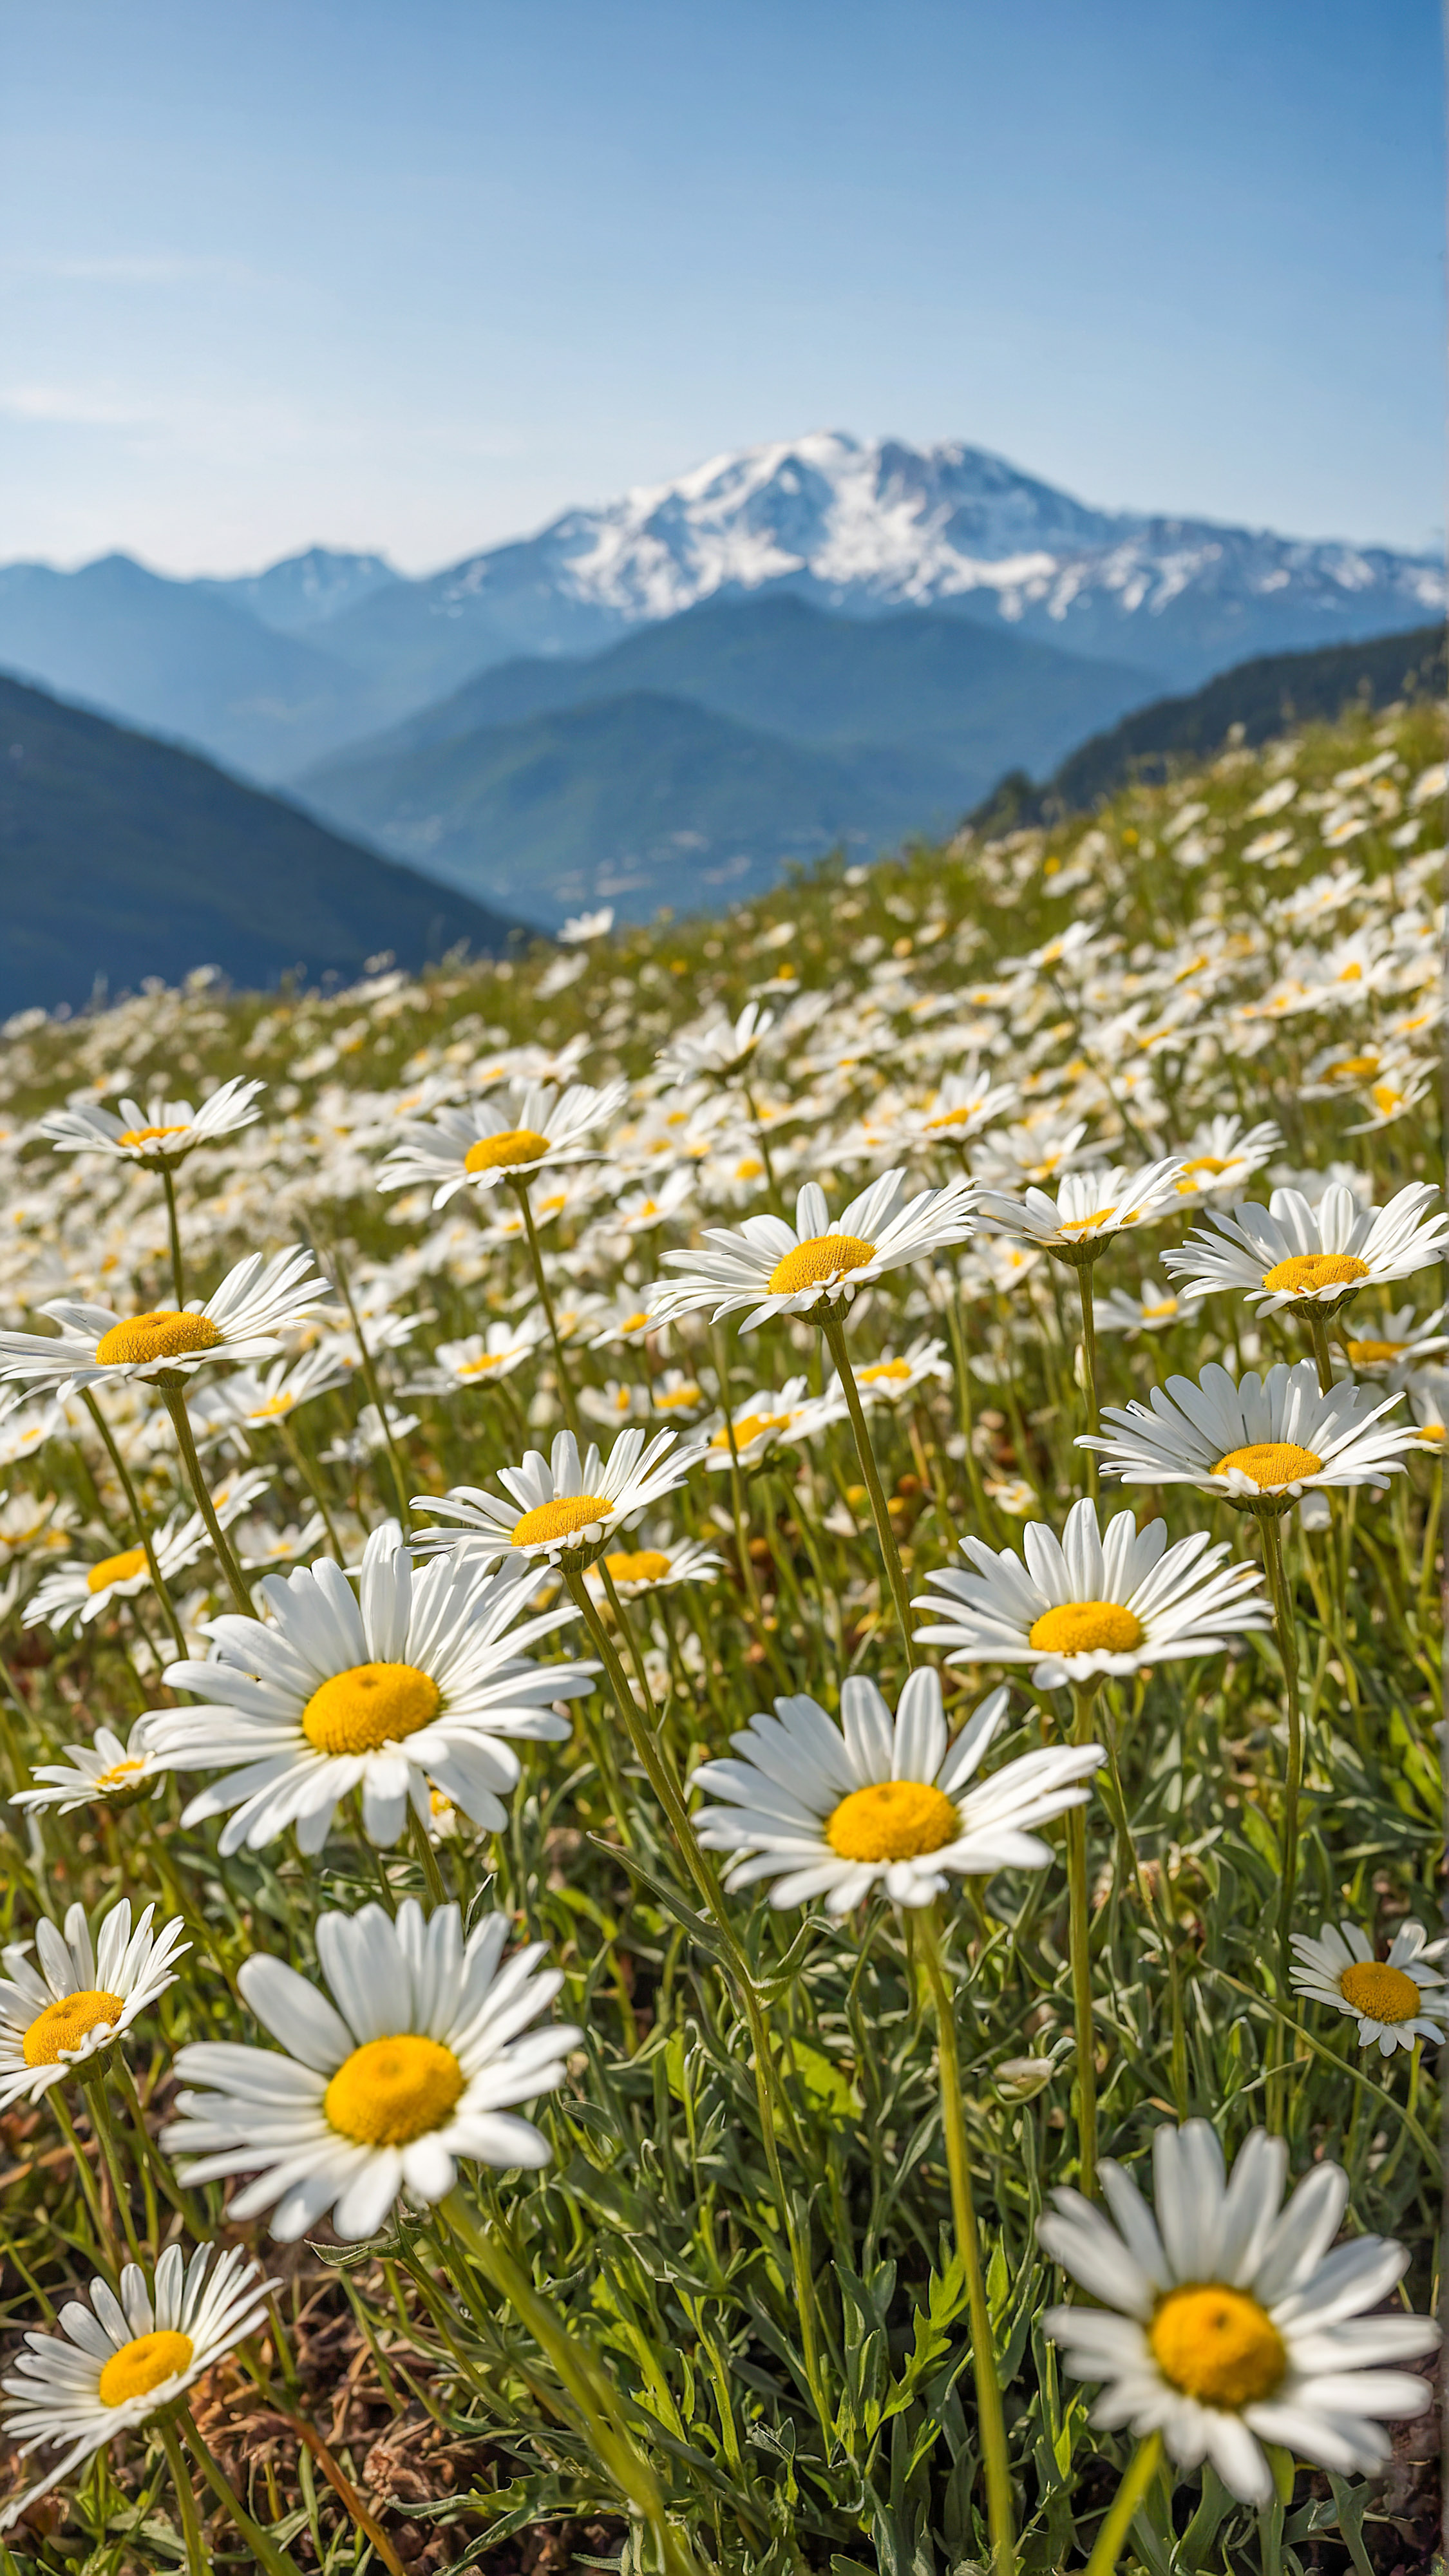 Get mesmerized with the tranquility of our aesthetic iPhone background wallpaper, showcasing a serene field of blooming daisies flowers, with a mountainous landscape under a clear sky in the background.